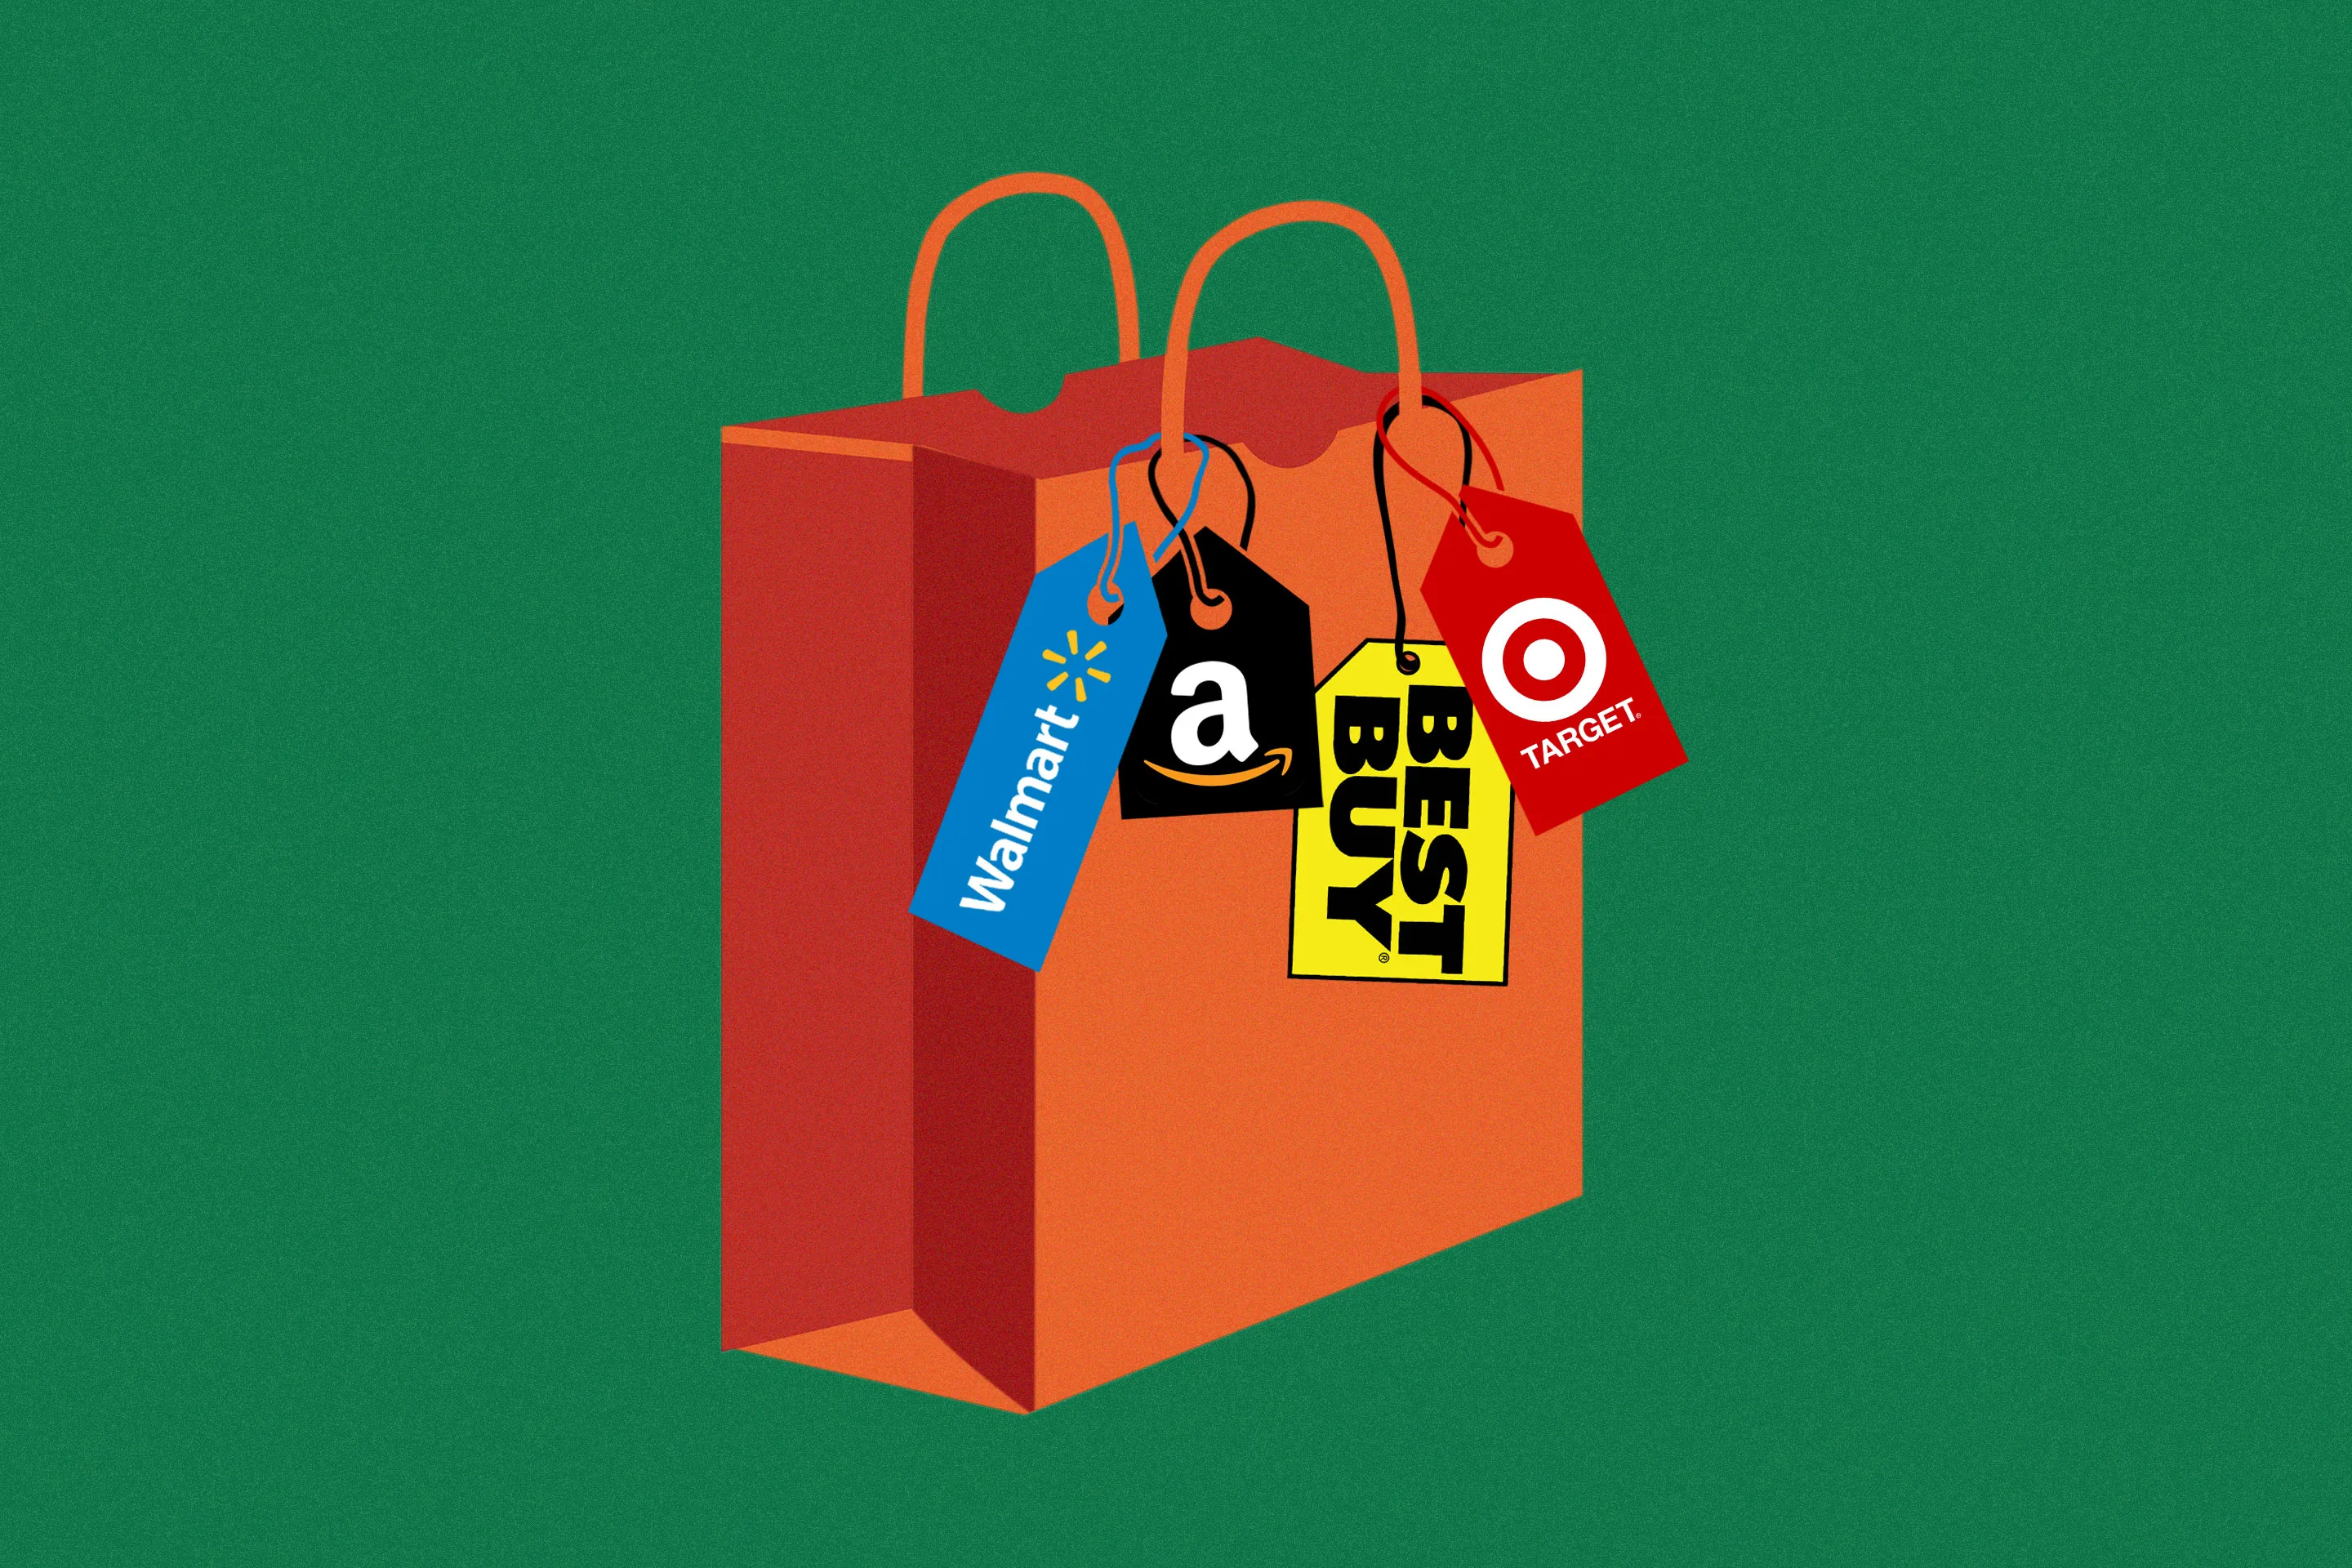 Black Friday 2020: How to Get the Best Deals, Avoid Overspending and Score Cash Back